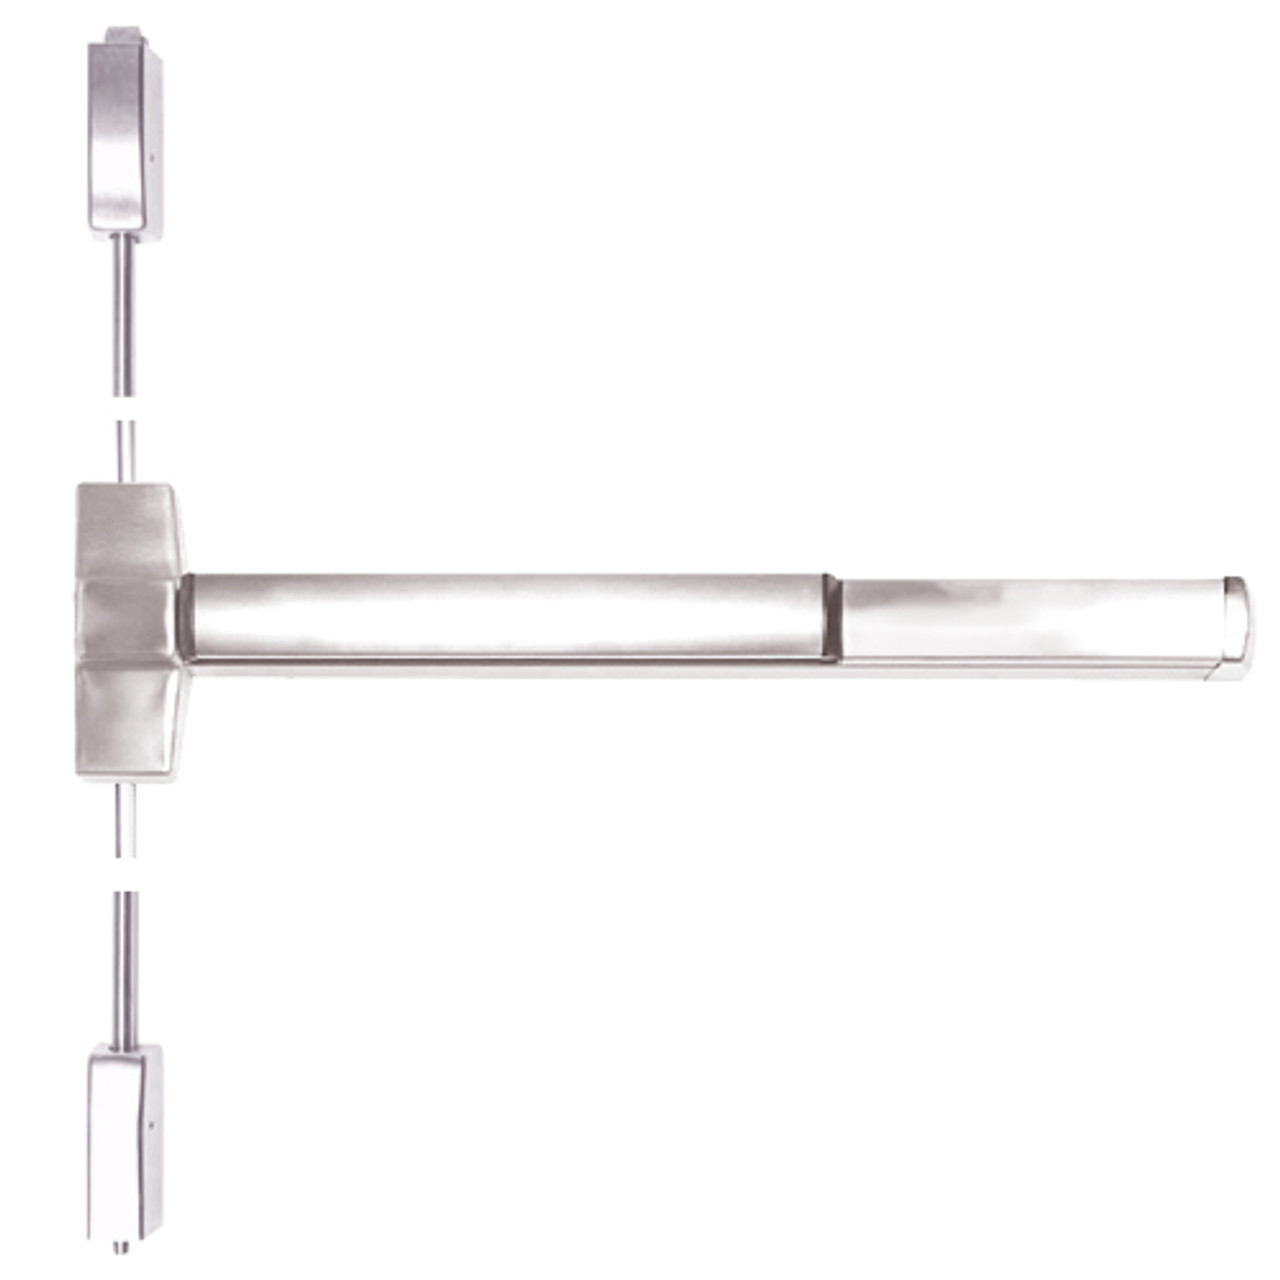 ED5400A-629-W048 Corbin ED5400 Series Fire Rated Vertical Rod Exit Device in Bright Stainless Steel Finish